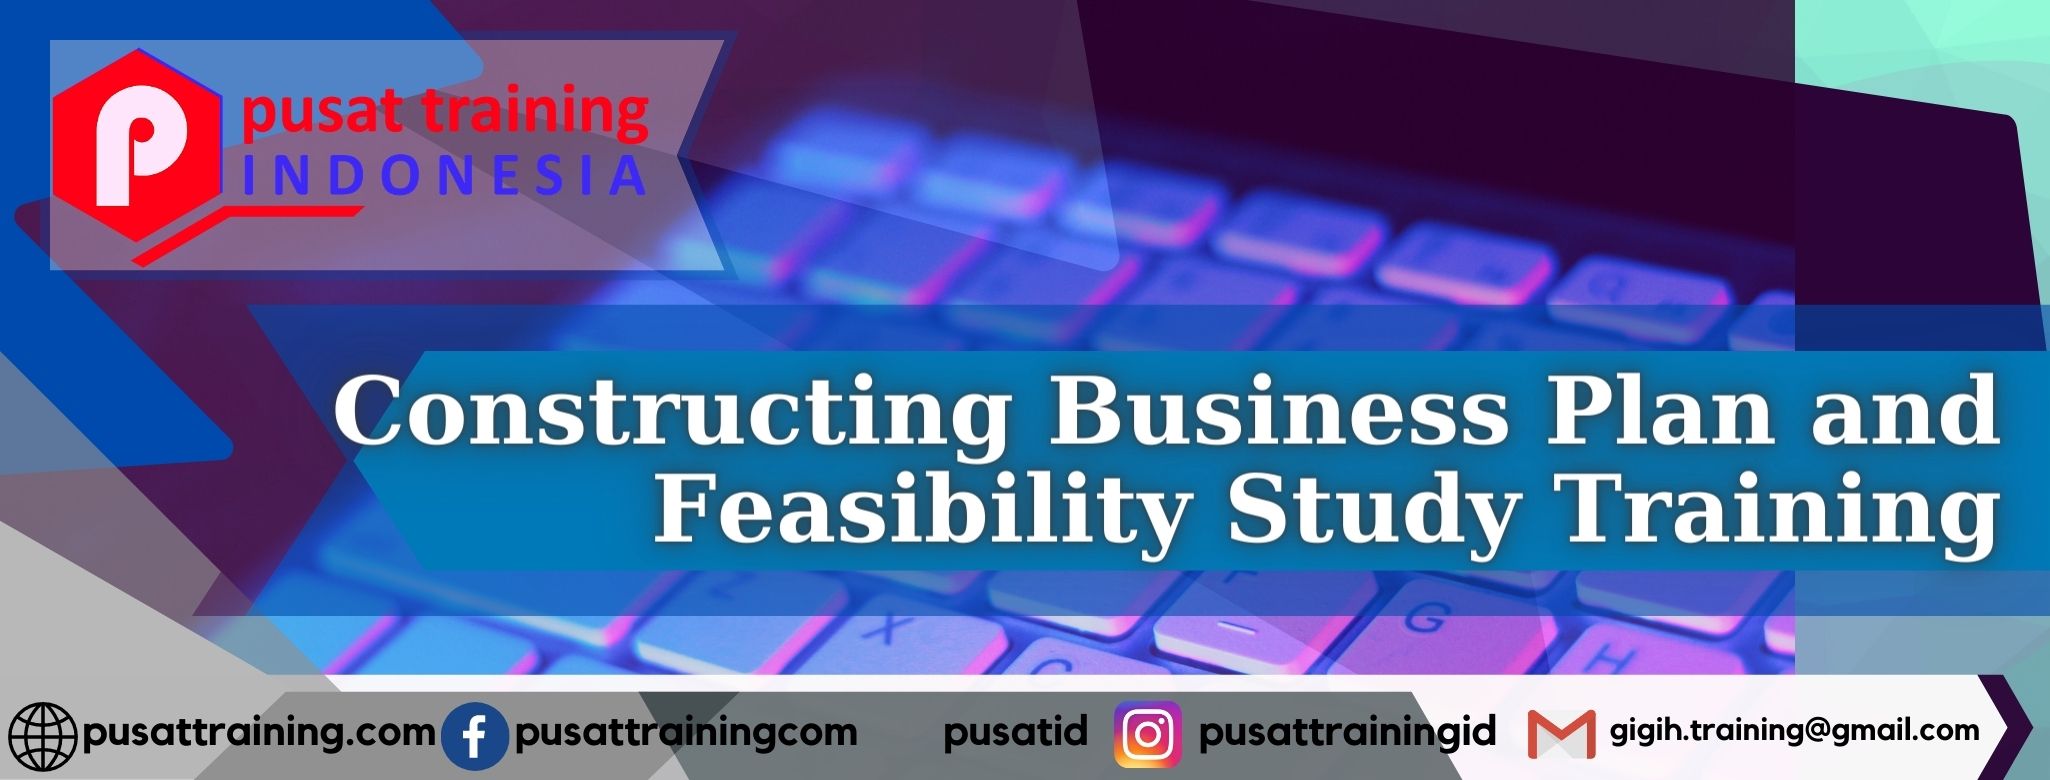 Constructing-Business-Plan-and-Feasibility-Study-Training